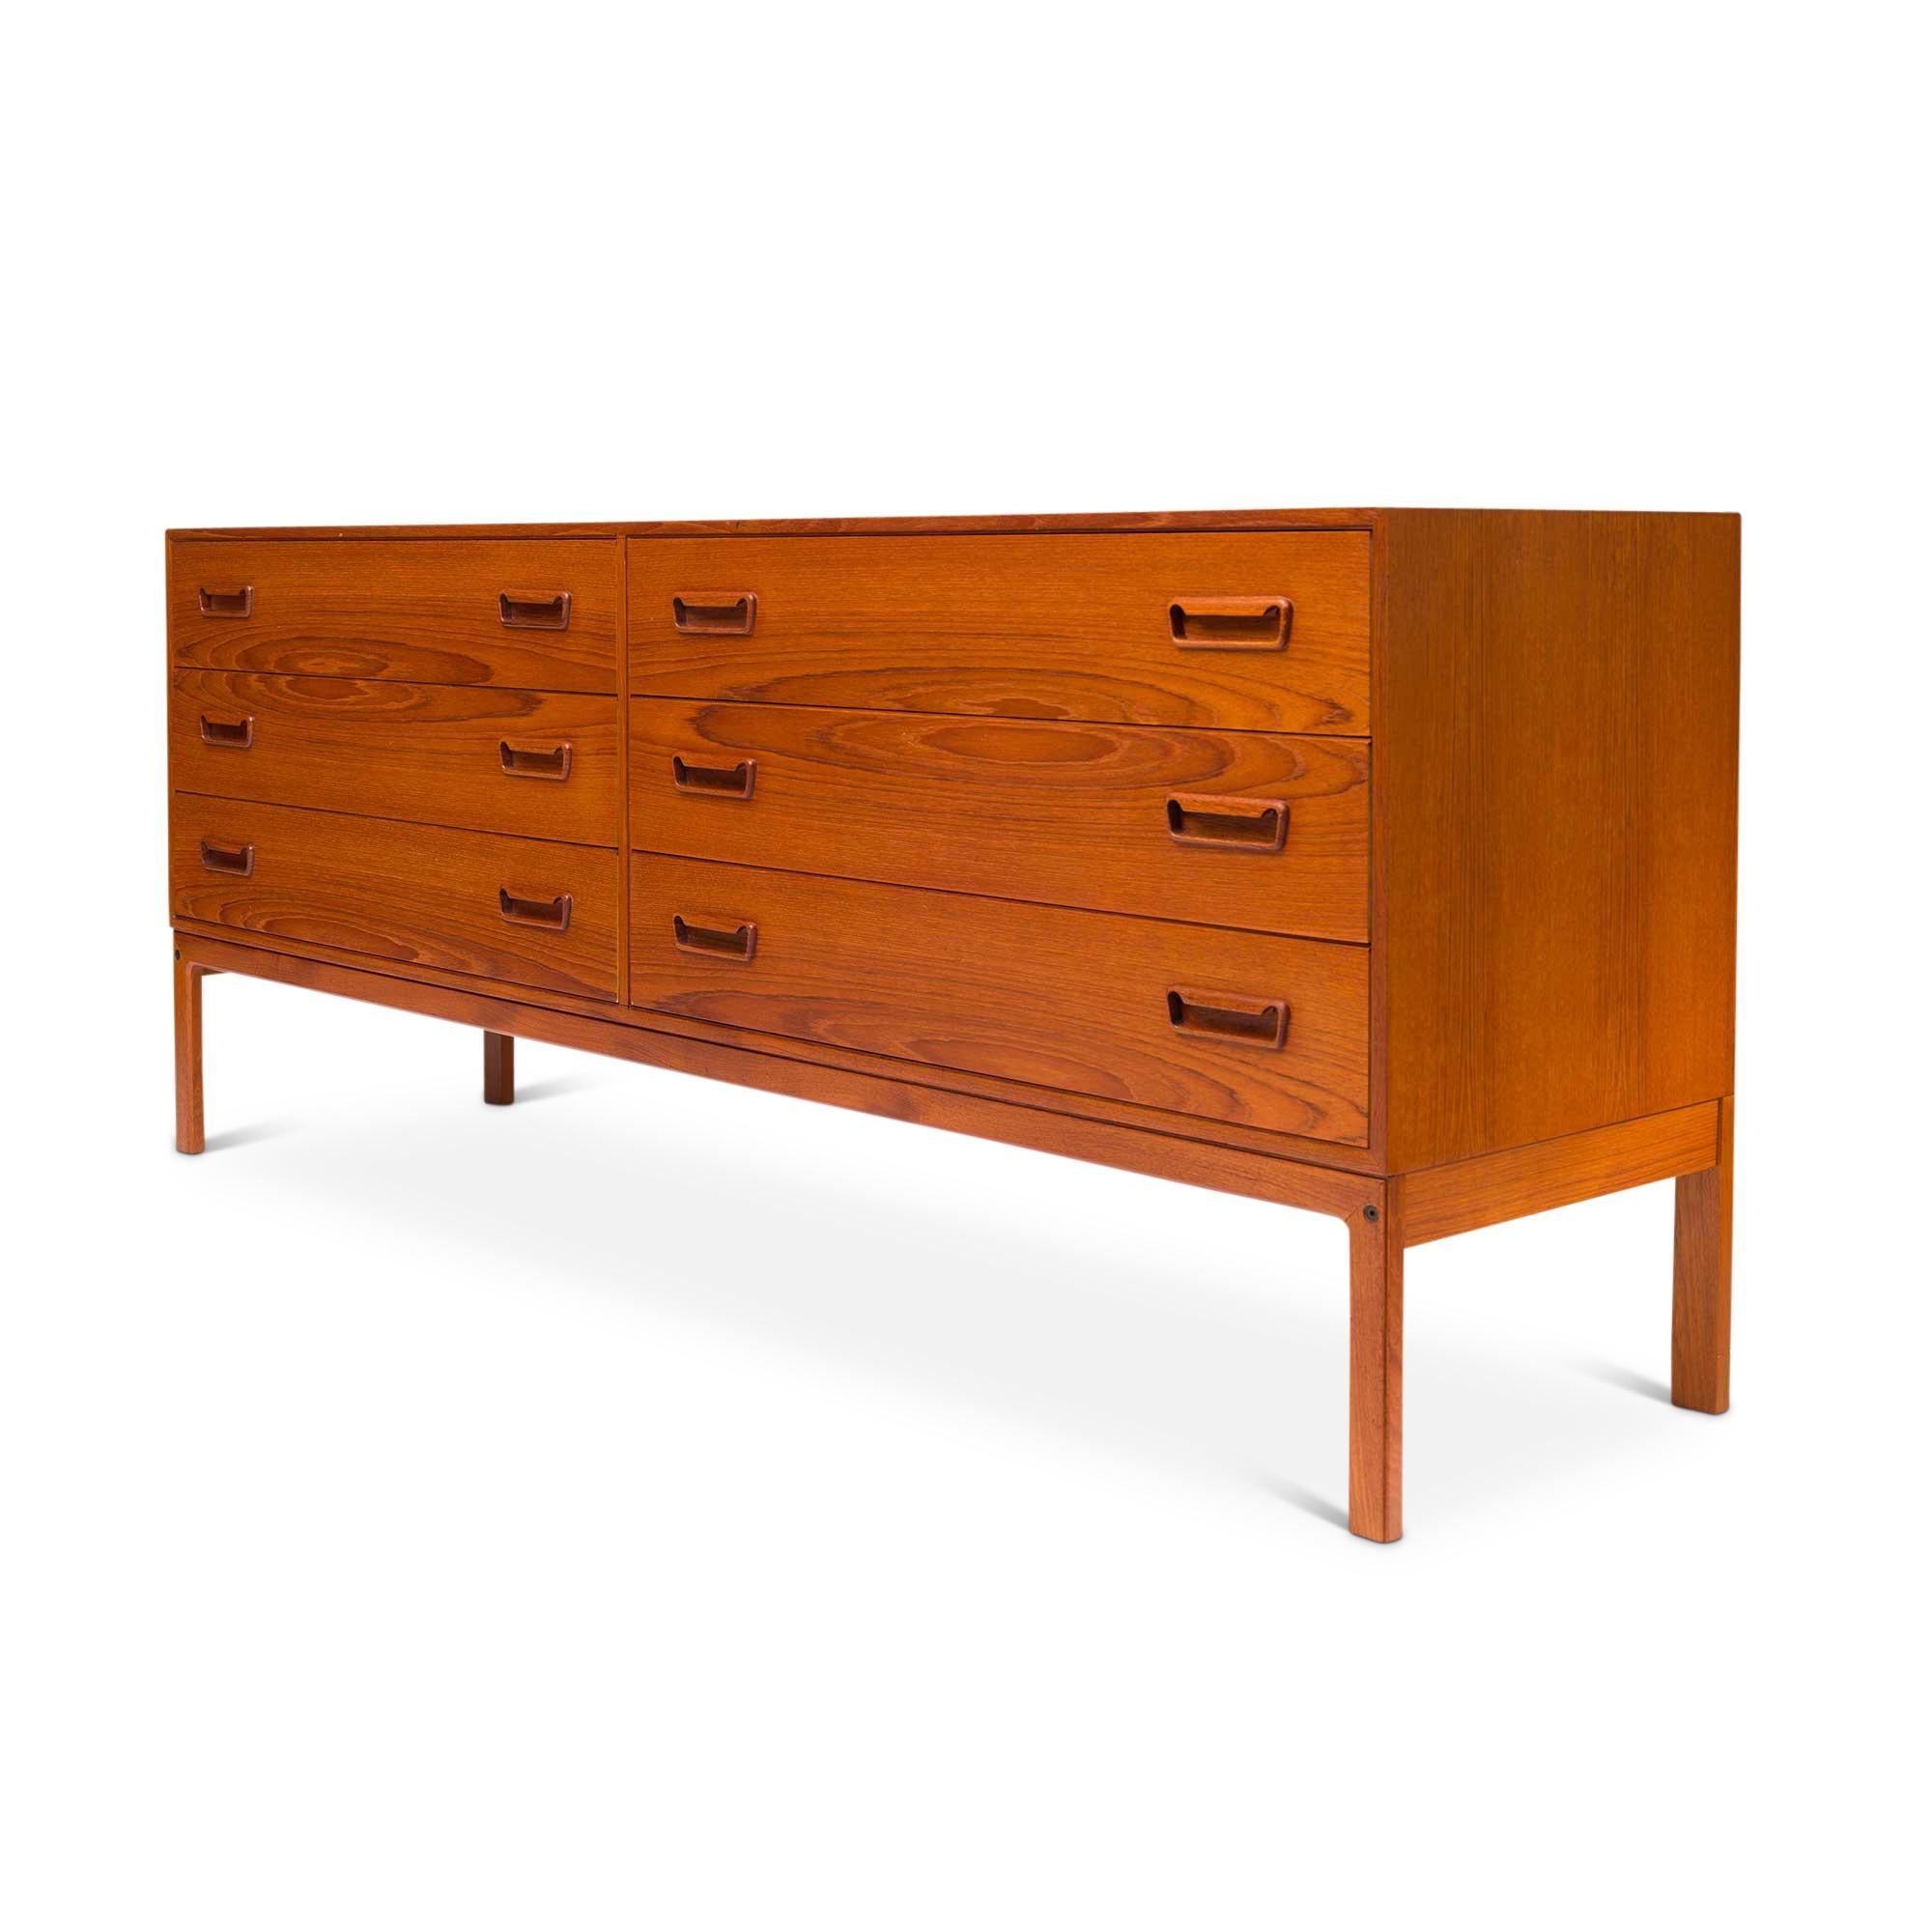 Arne Wahl Iversen (born in 1927), a luminary of mid-century Danish design, embodies elegance and functionality in his iconic furniture pieces. Revered for his use of teak and rosewood, his chairs, sideboards, and desks stand as timeless testaments